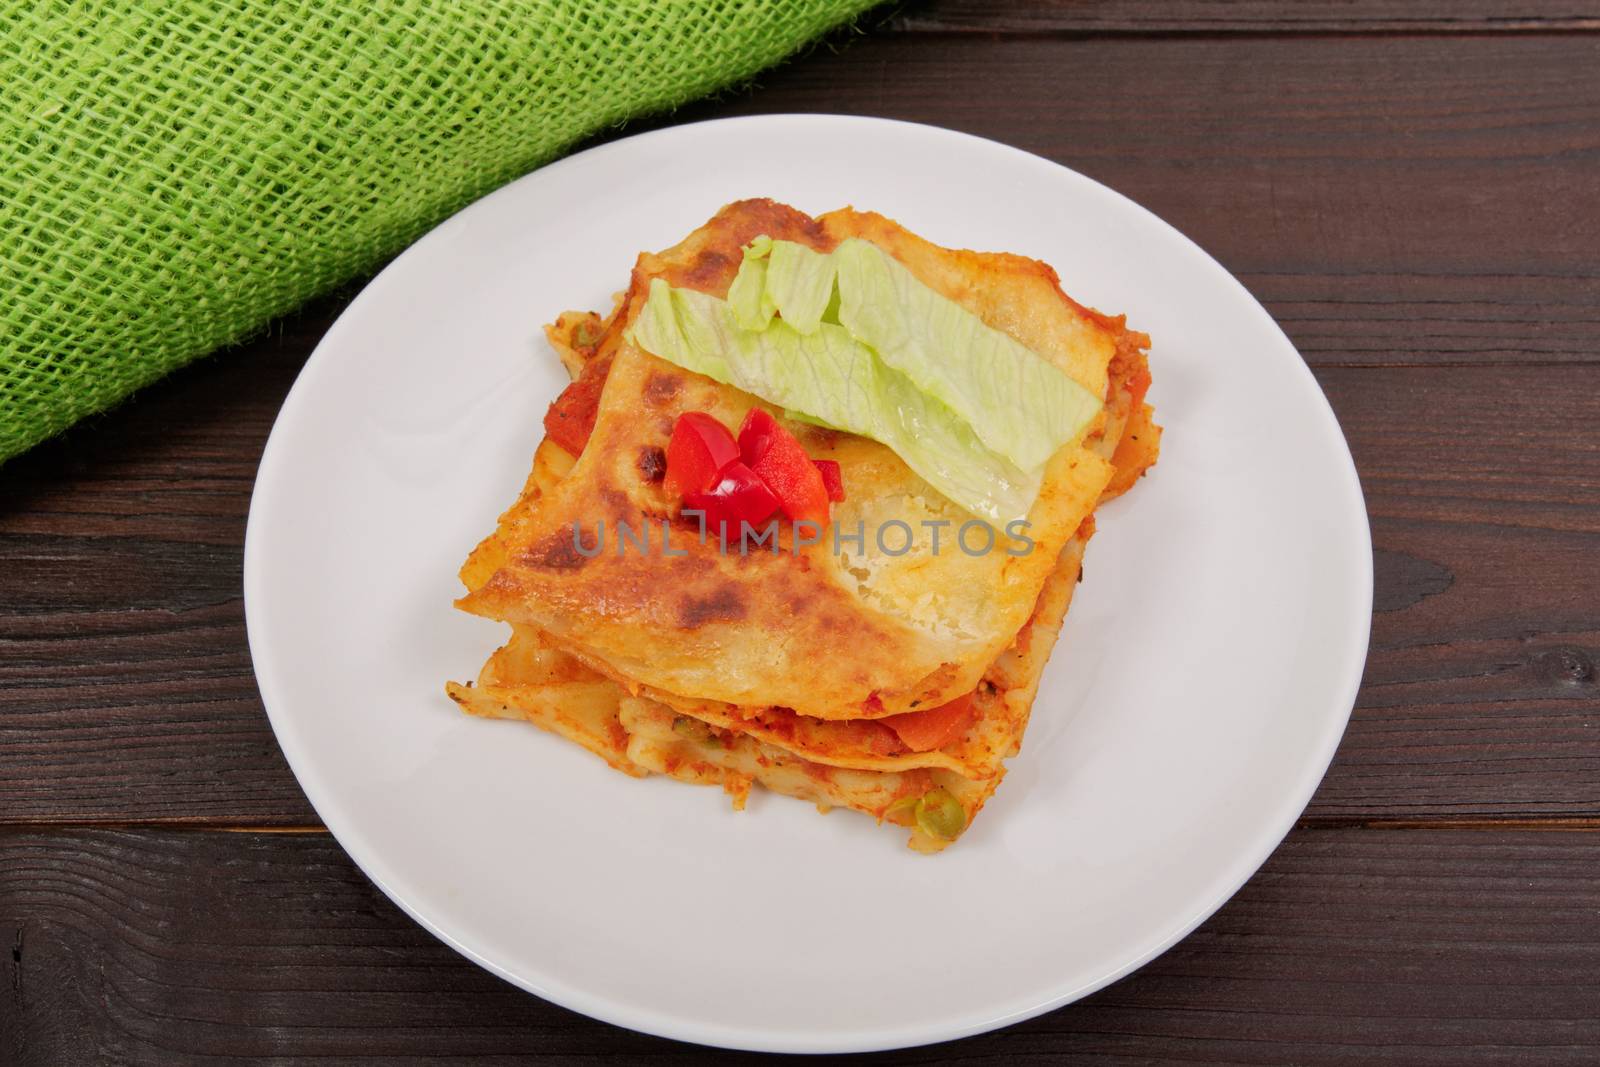 Lasagna with vegetables on a wooden table